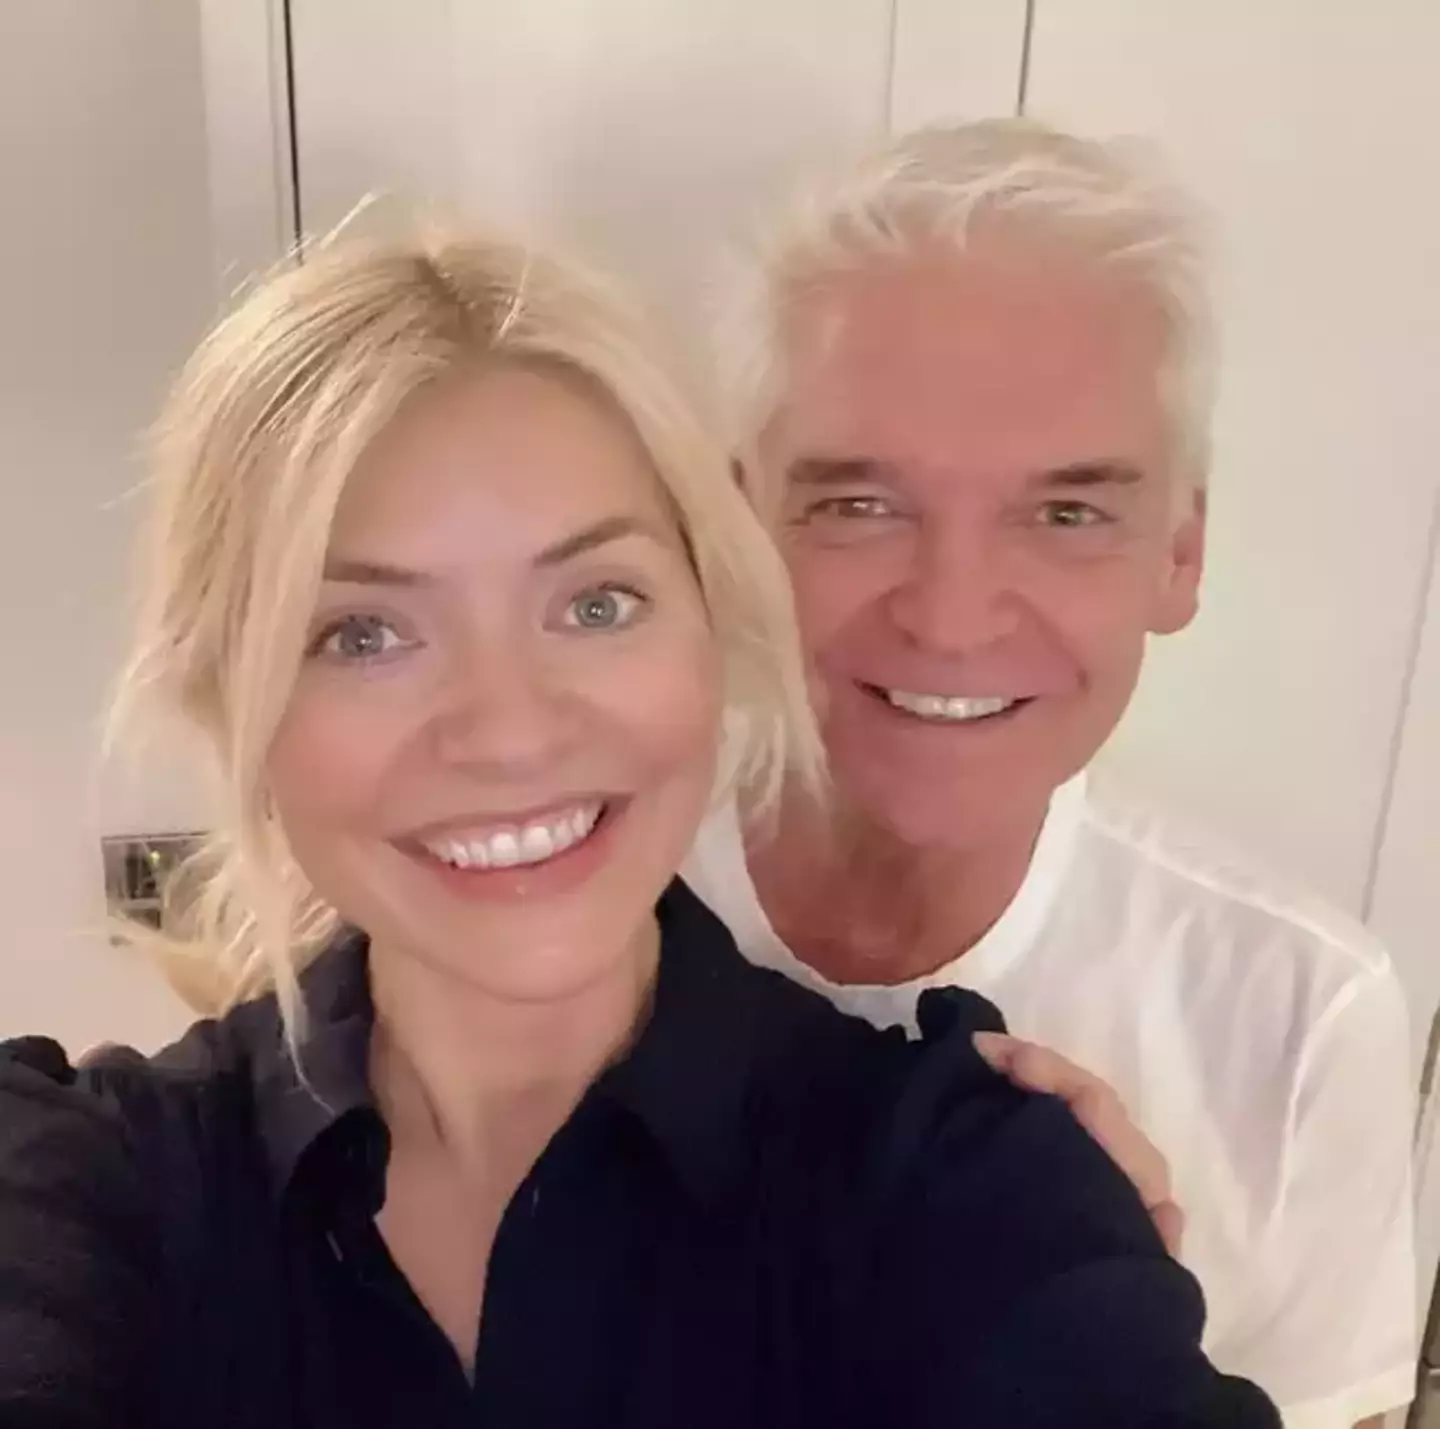 Phillip Schofield is leaving This Morning, Holly Willoughby will be staying on the show.